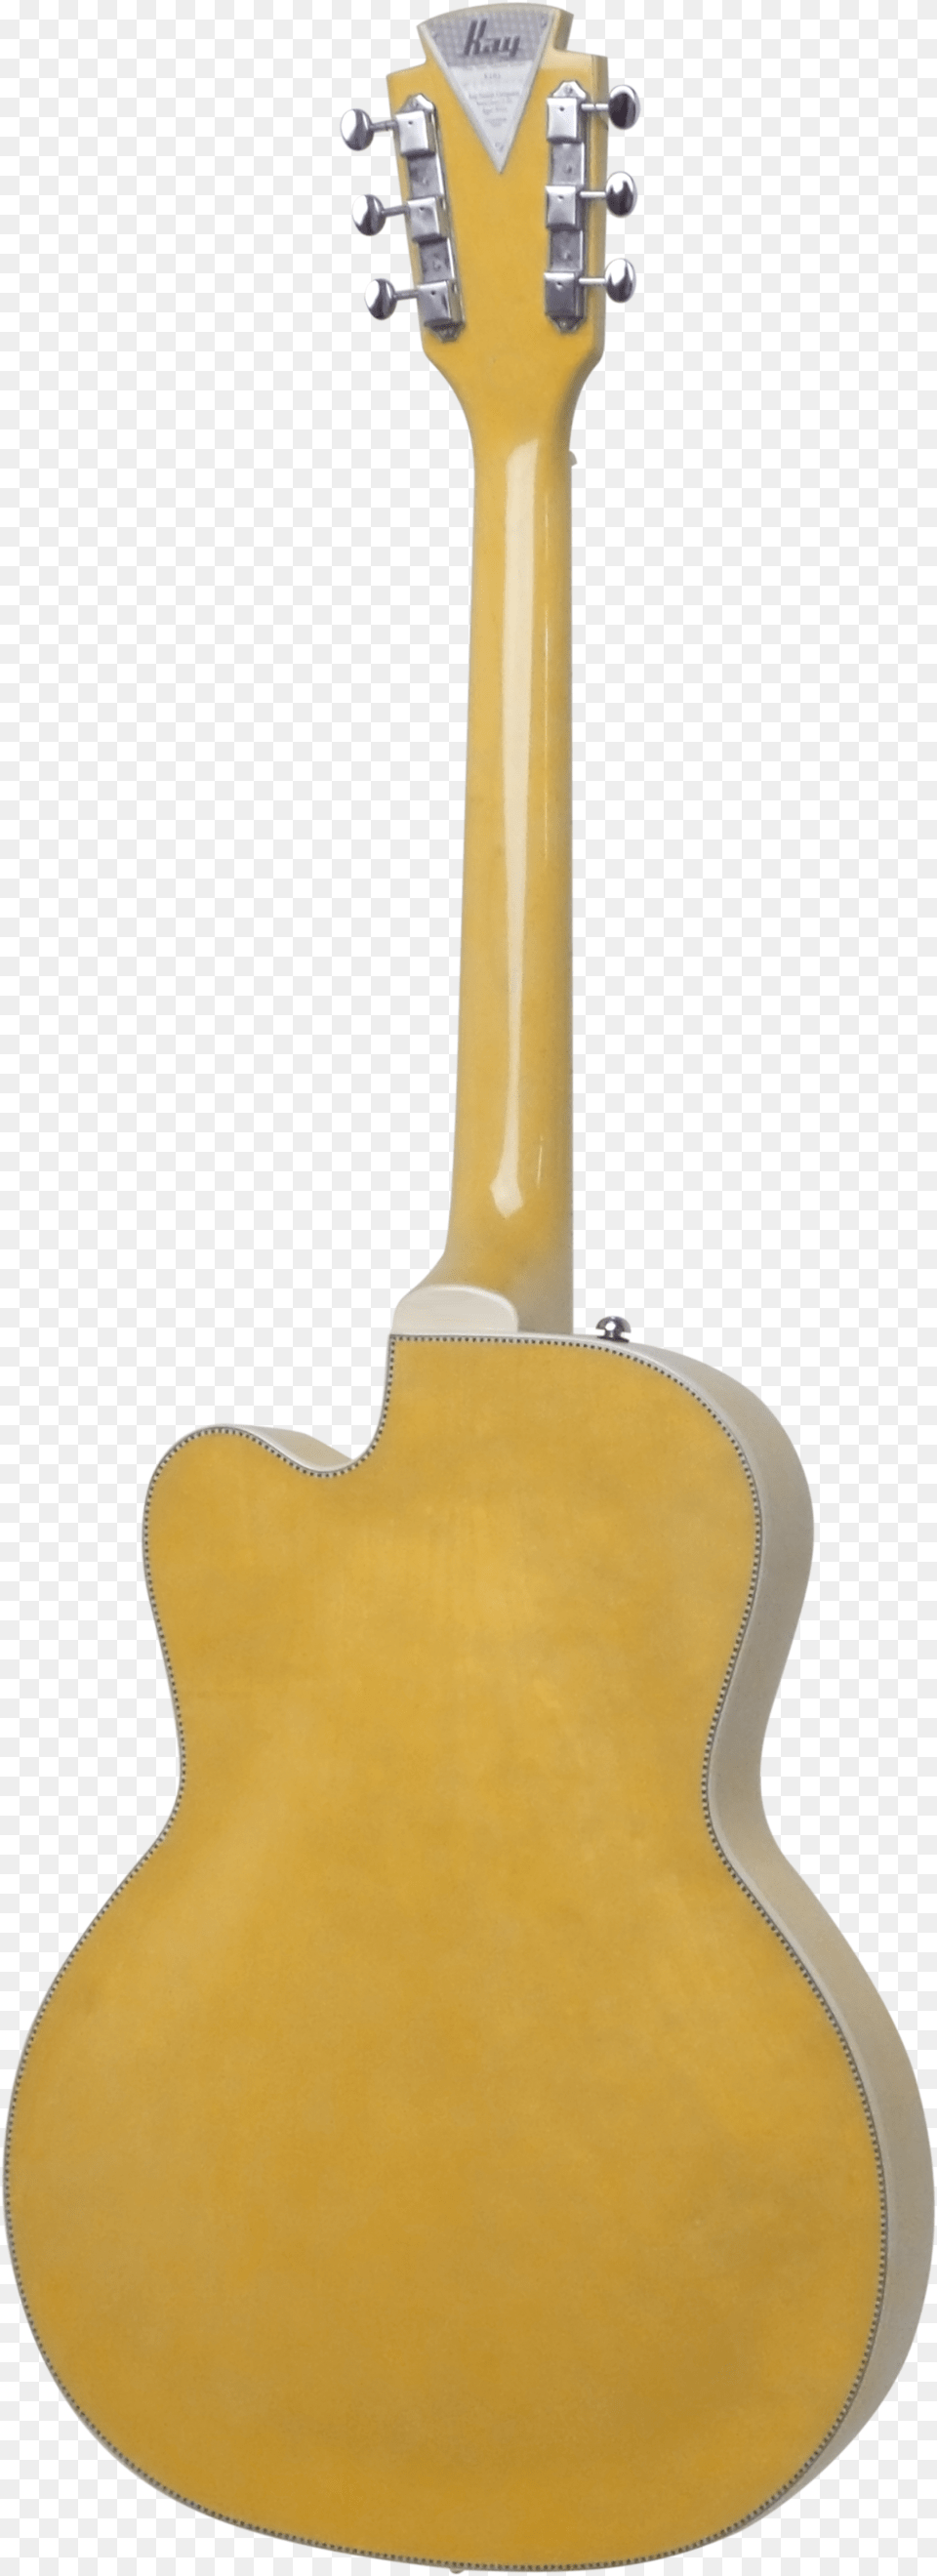 Electric Guitar, Musical Instrument Png Image